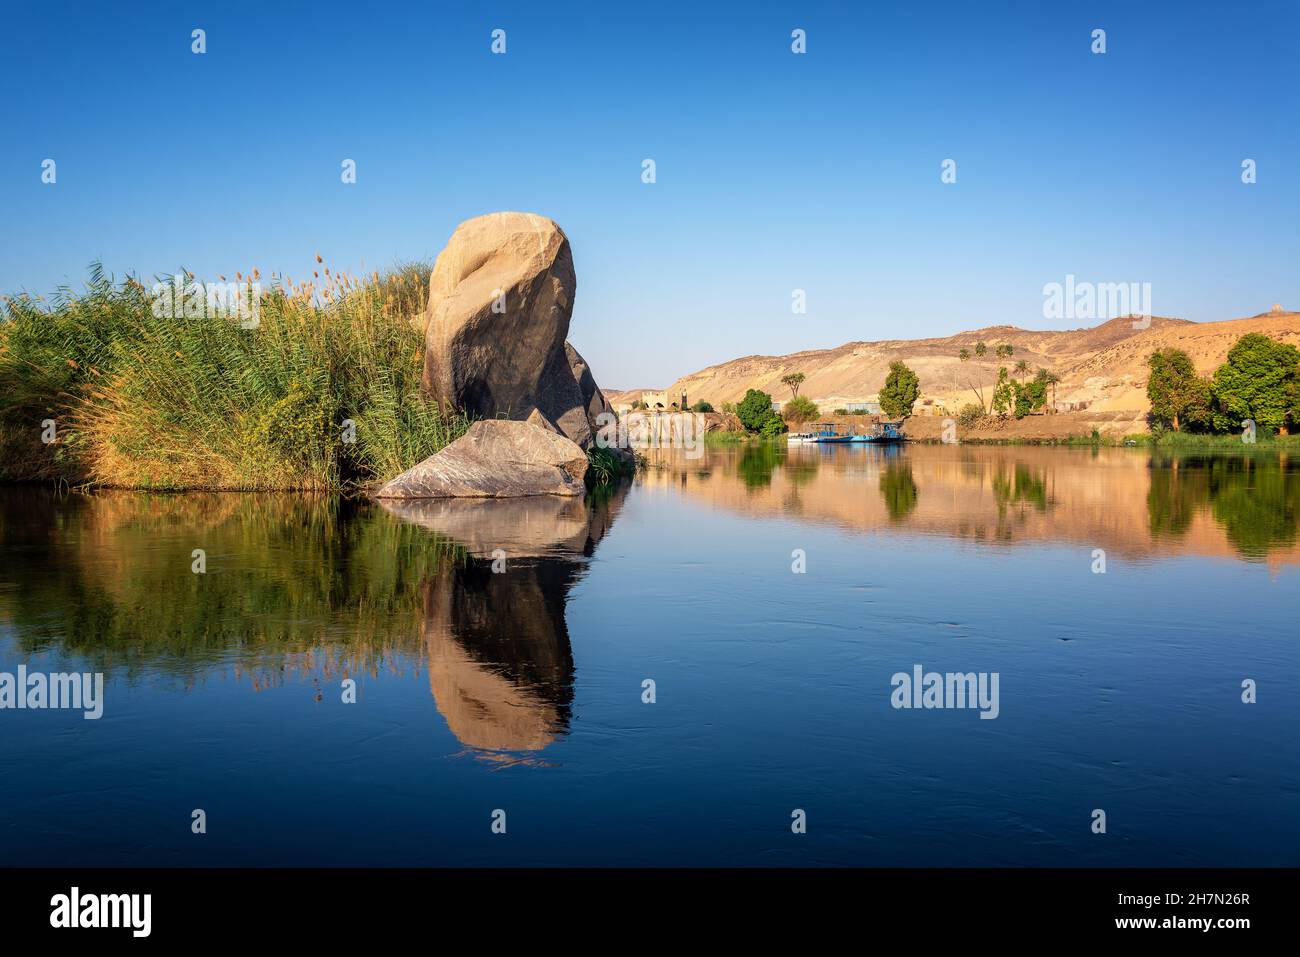 Mirror like reflections on the Nile River in Aswan, Egypt Stock Photo